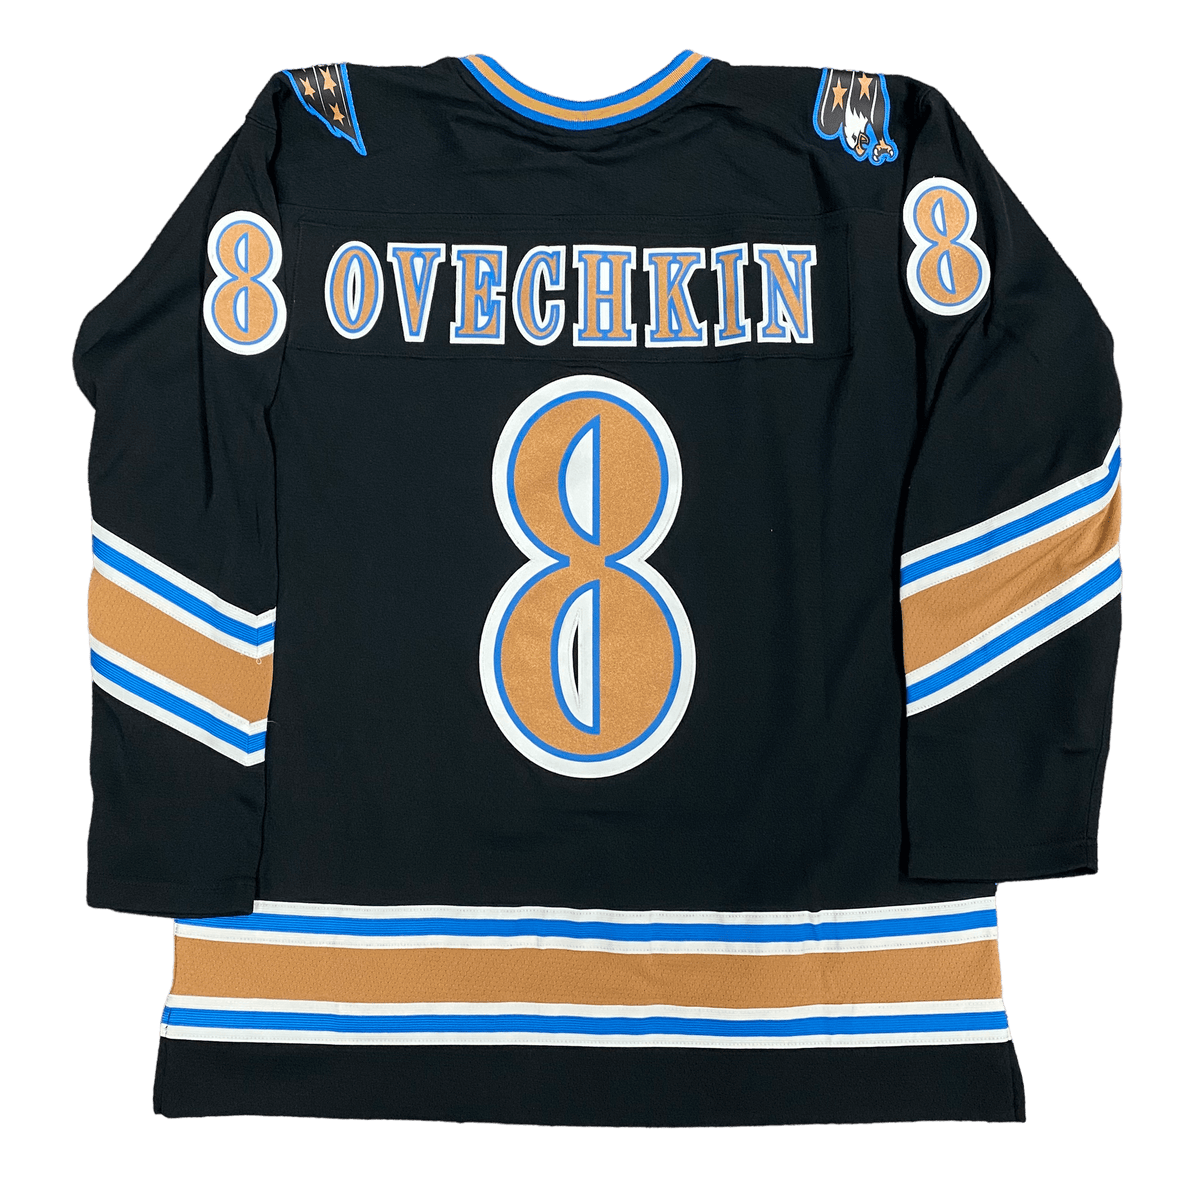 NHL Shop re-releases Alex Ovechkin Winter Classic jersey made by